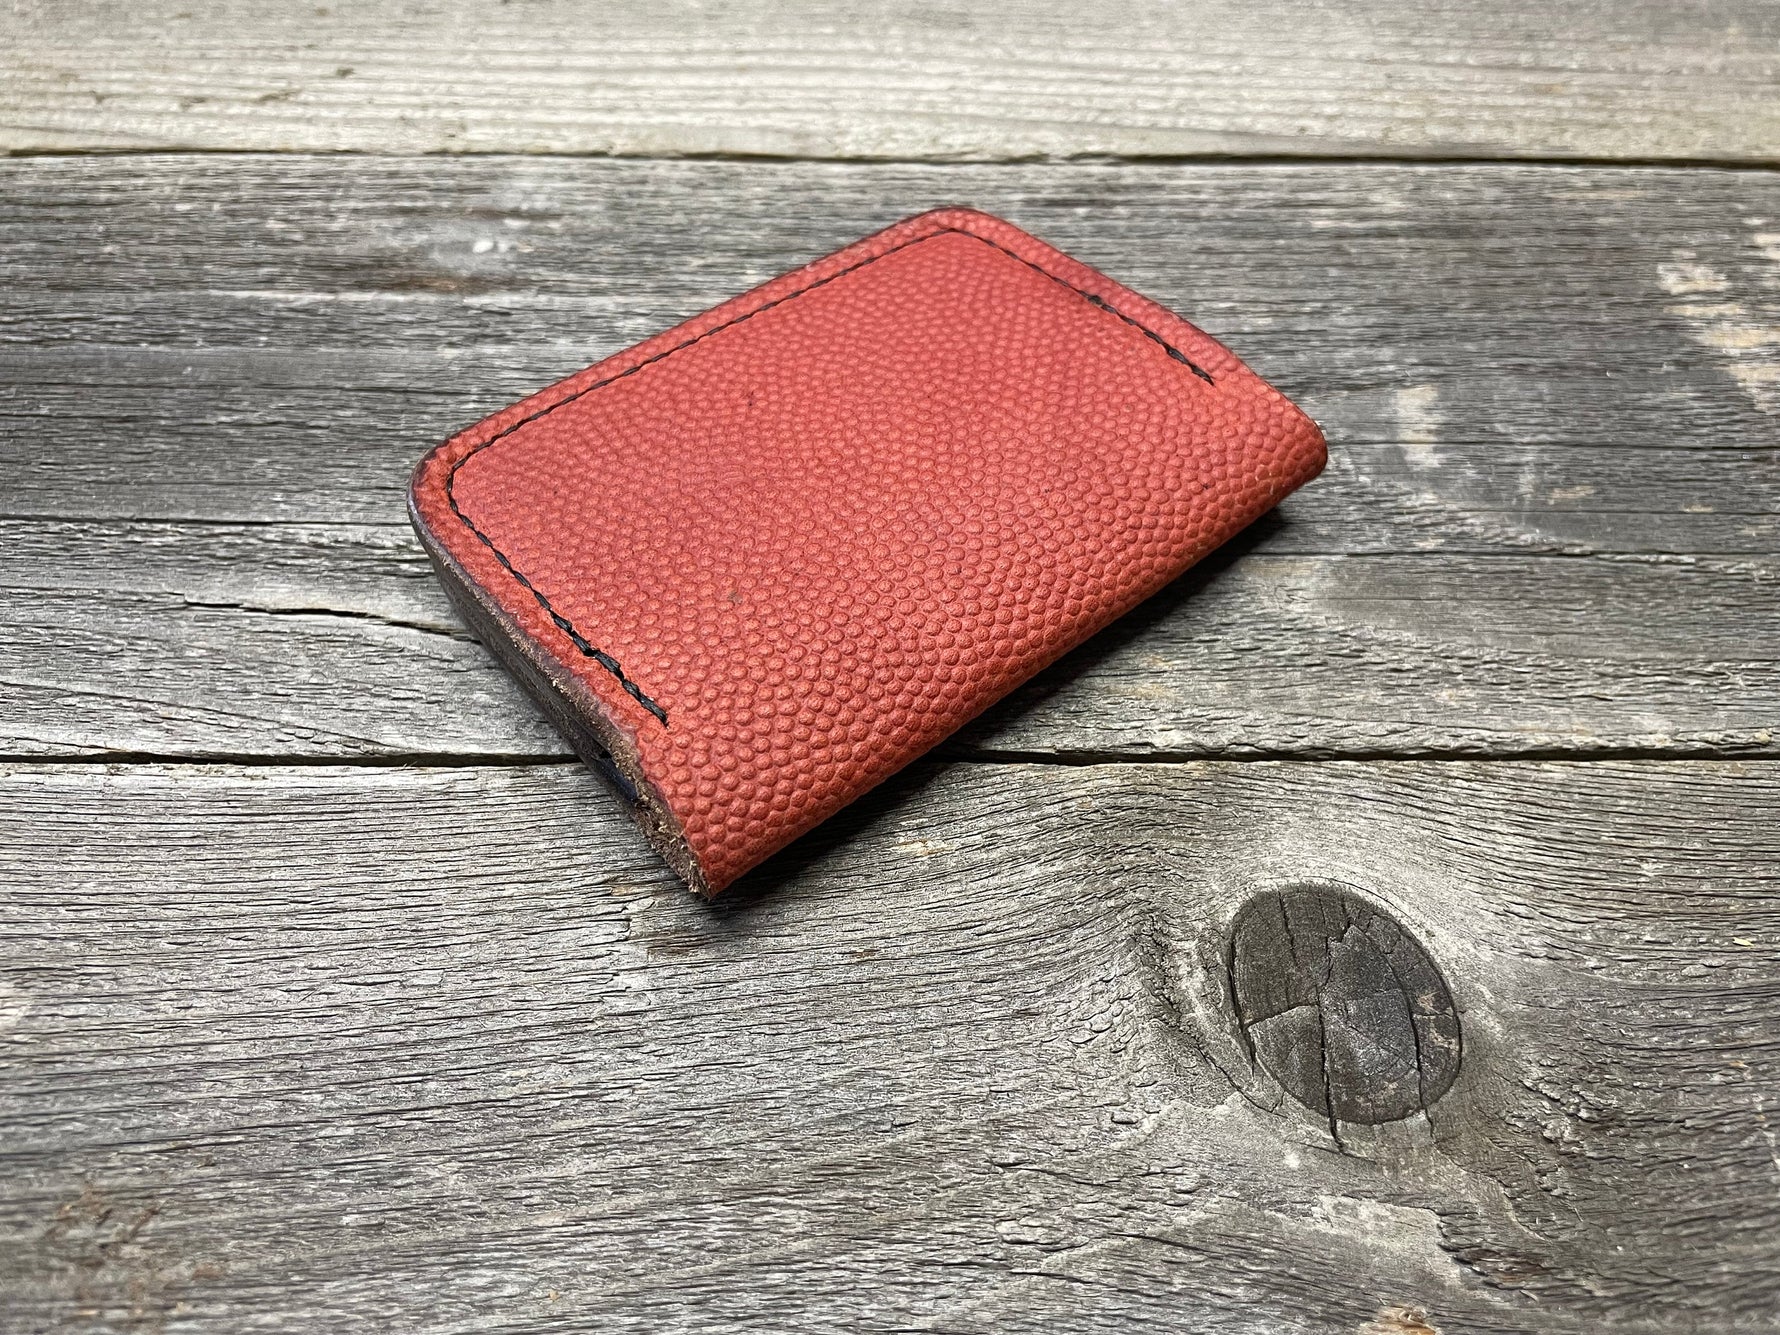 Horween x Wilson NFL Football Wallet - Hand Stitched!